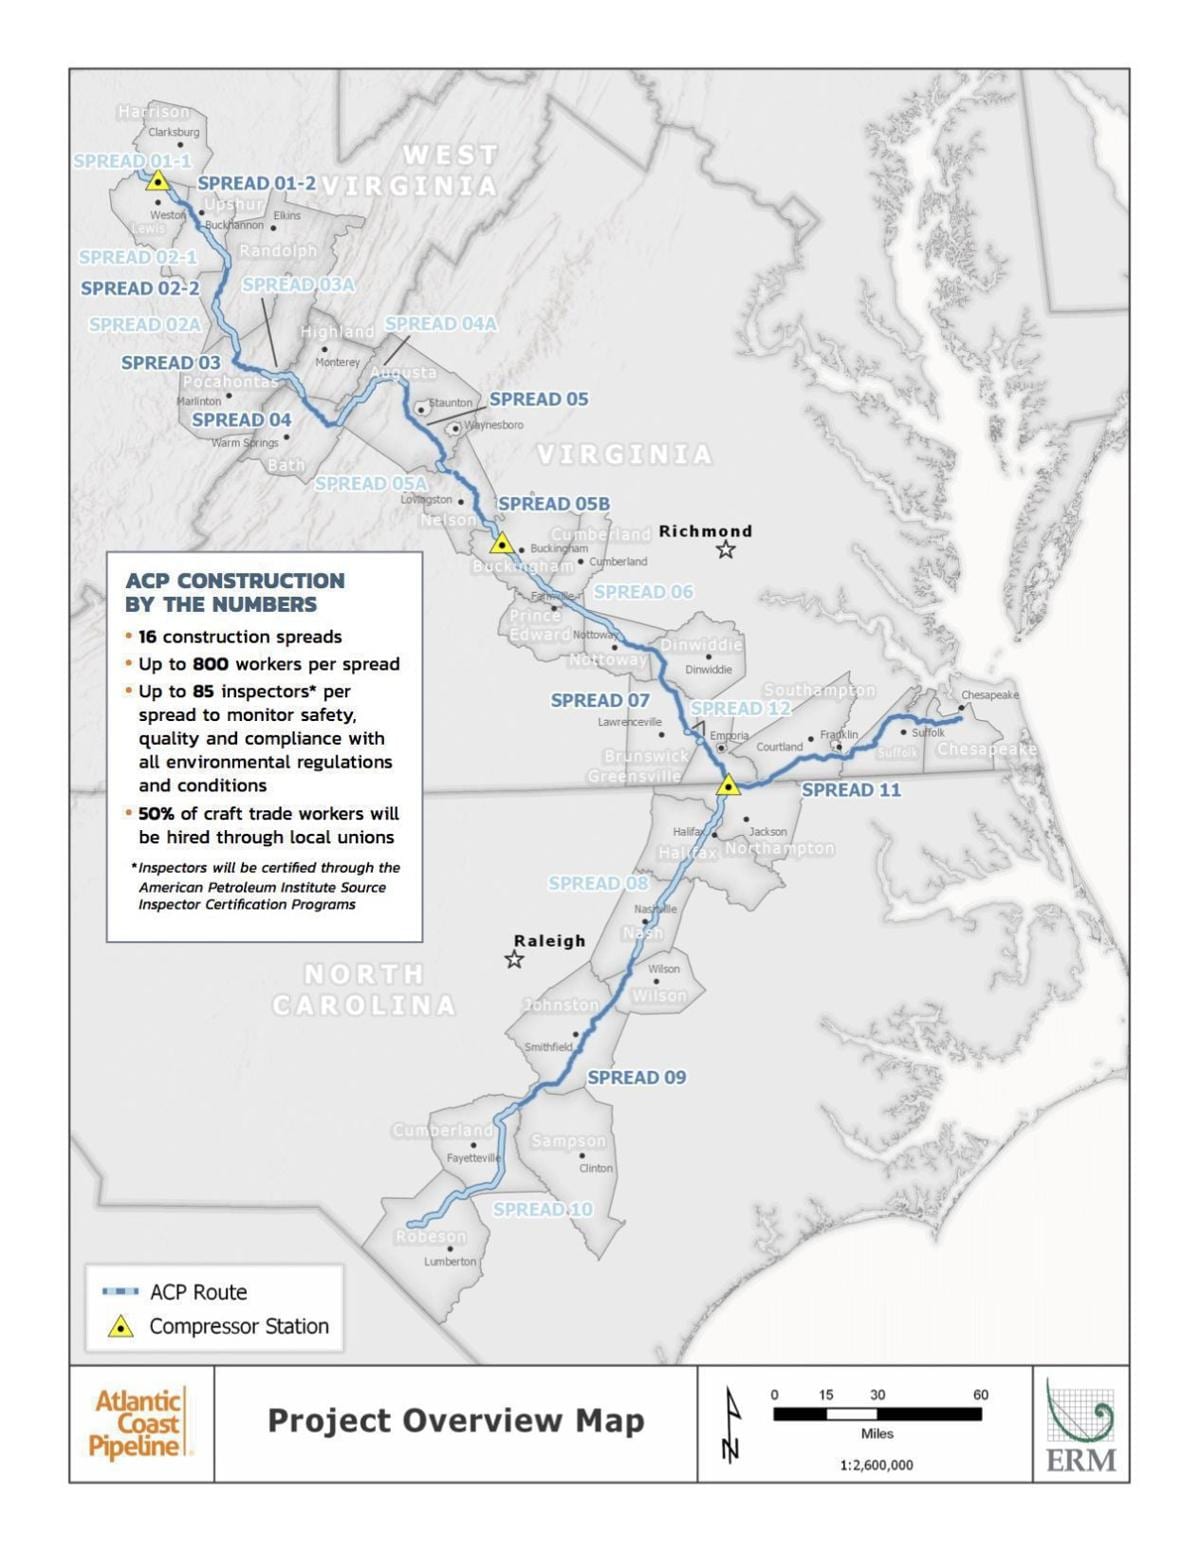 This map shows the proposed route of the Atlantic Coast Pipeline.